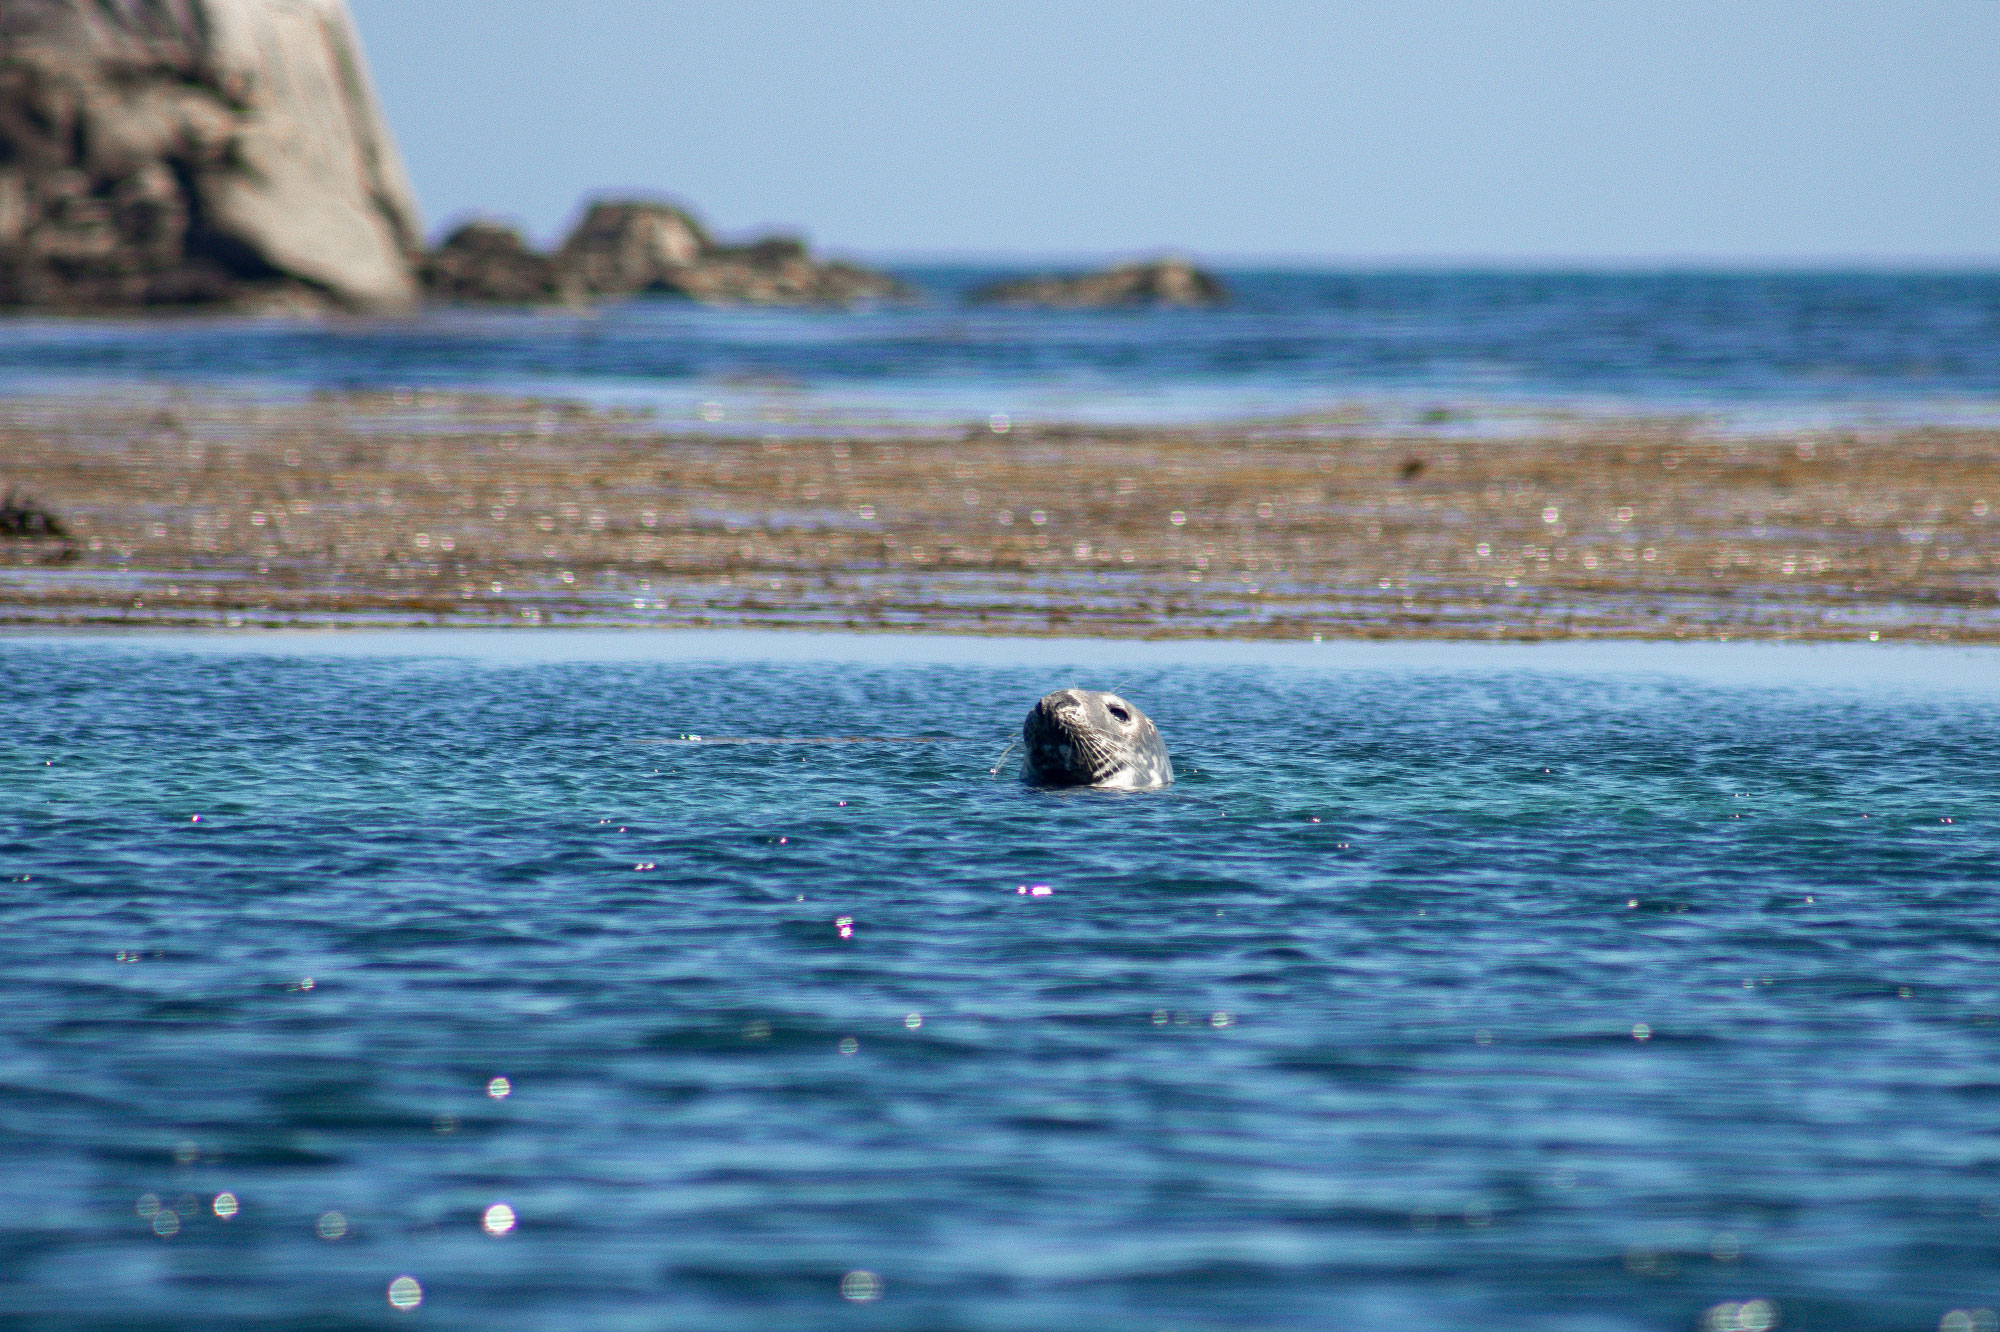 Seal popping its head above the water